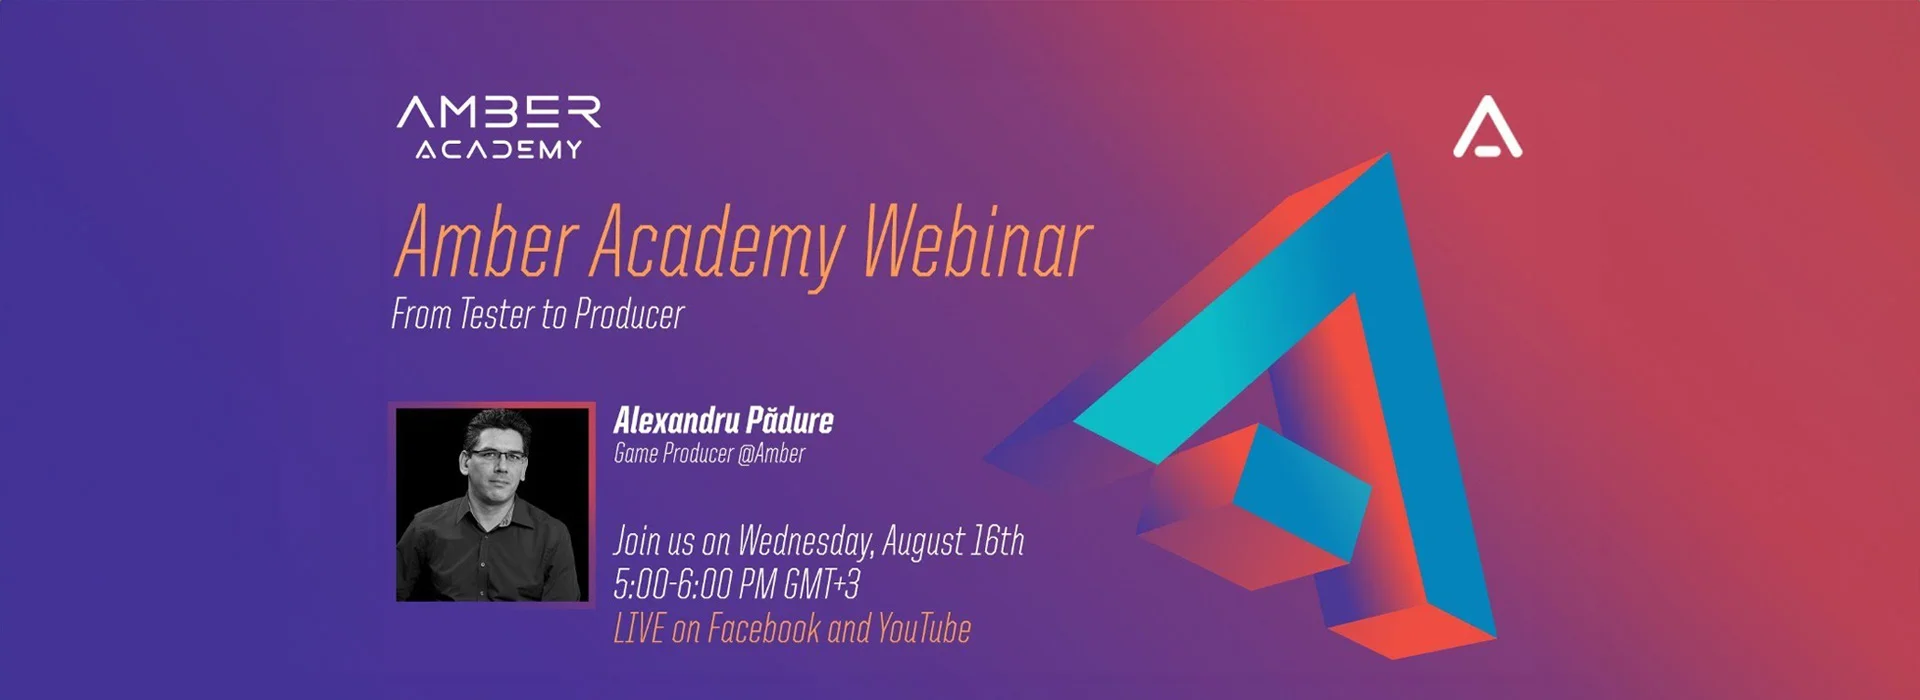 Amber Academy Webinar - From Tester to Producer